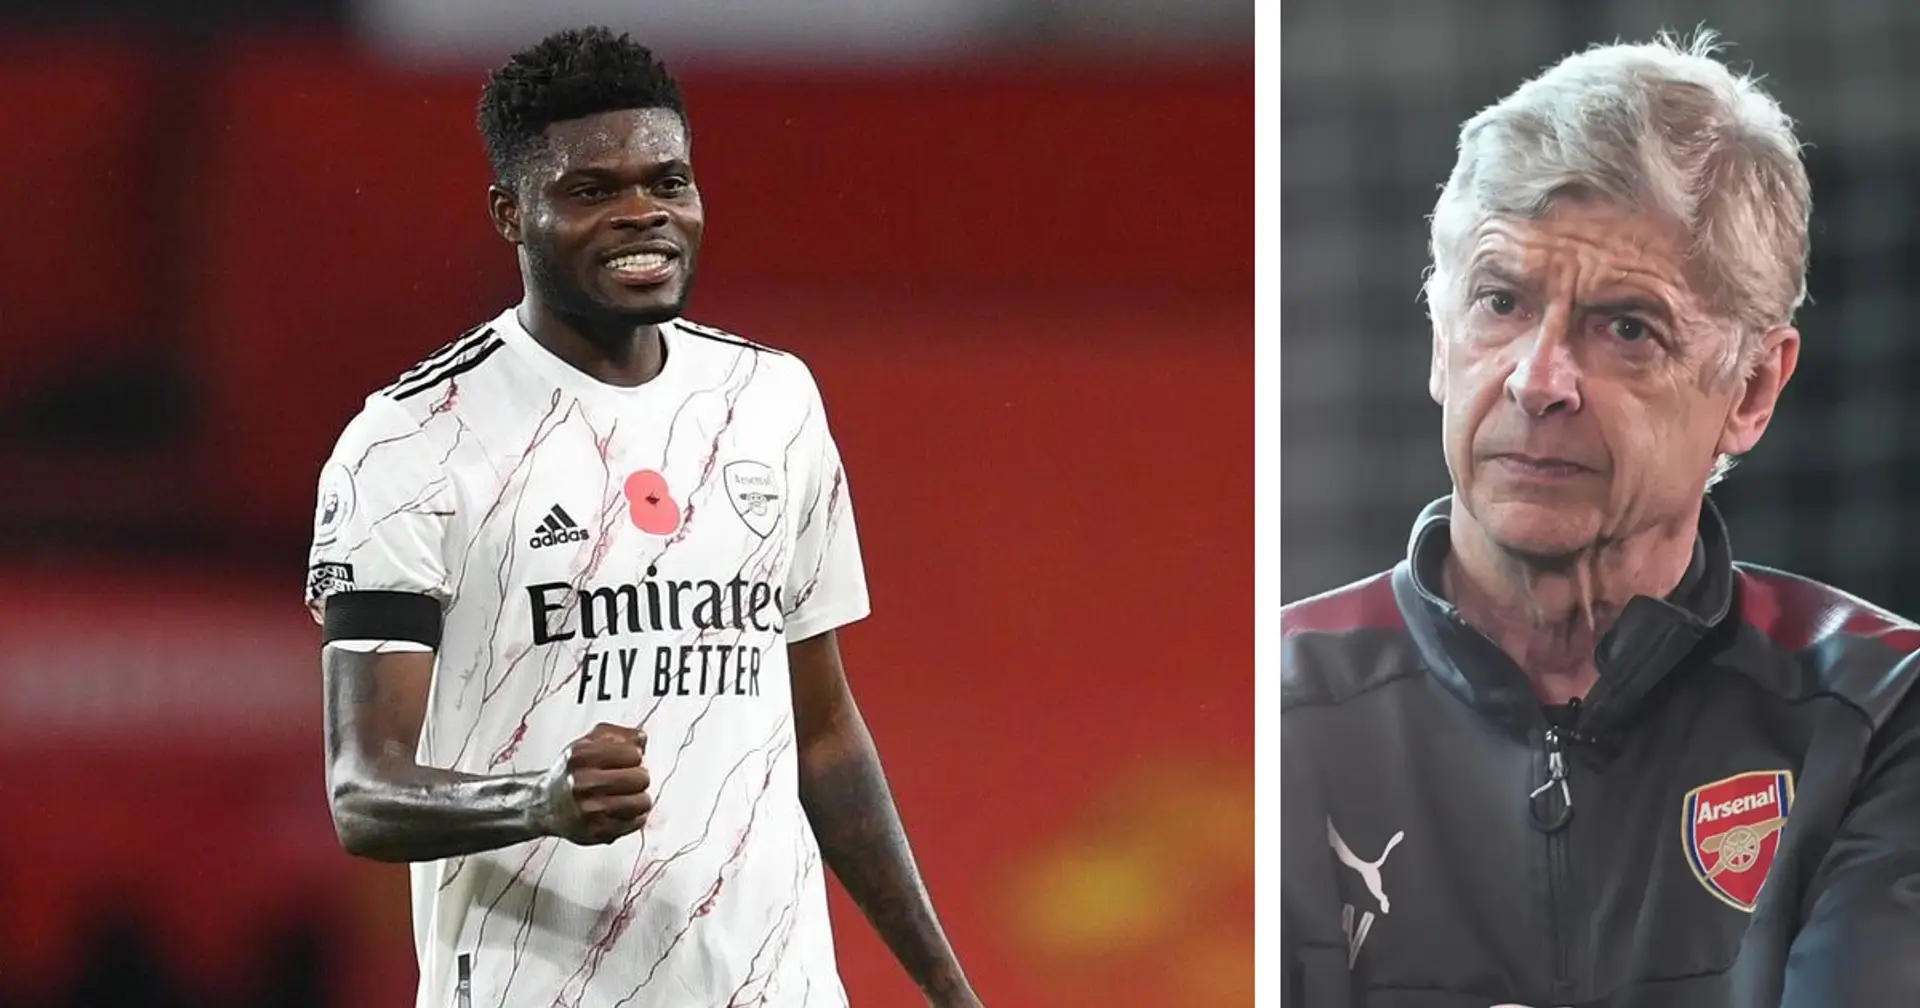 'The player Wenger would've loved to have': fan brilliantly explains why Partey could lead Arsenal revival